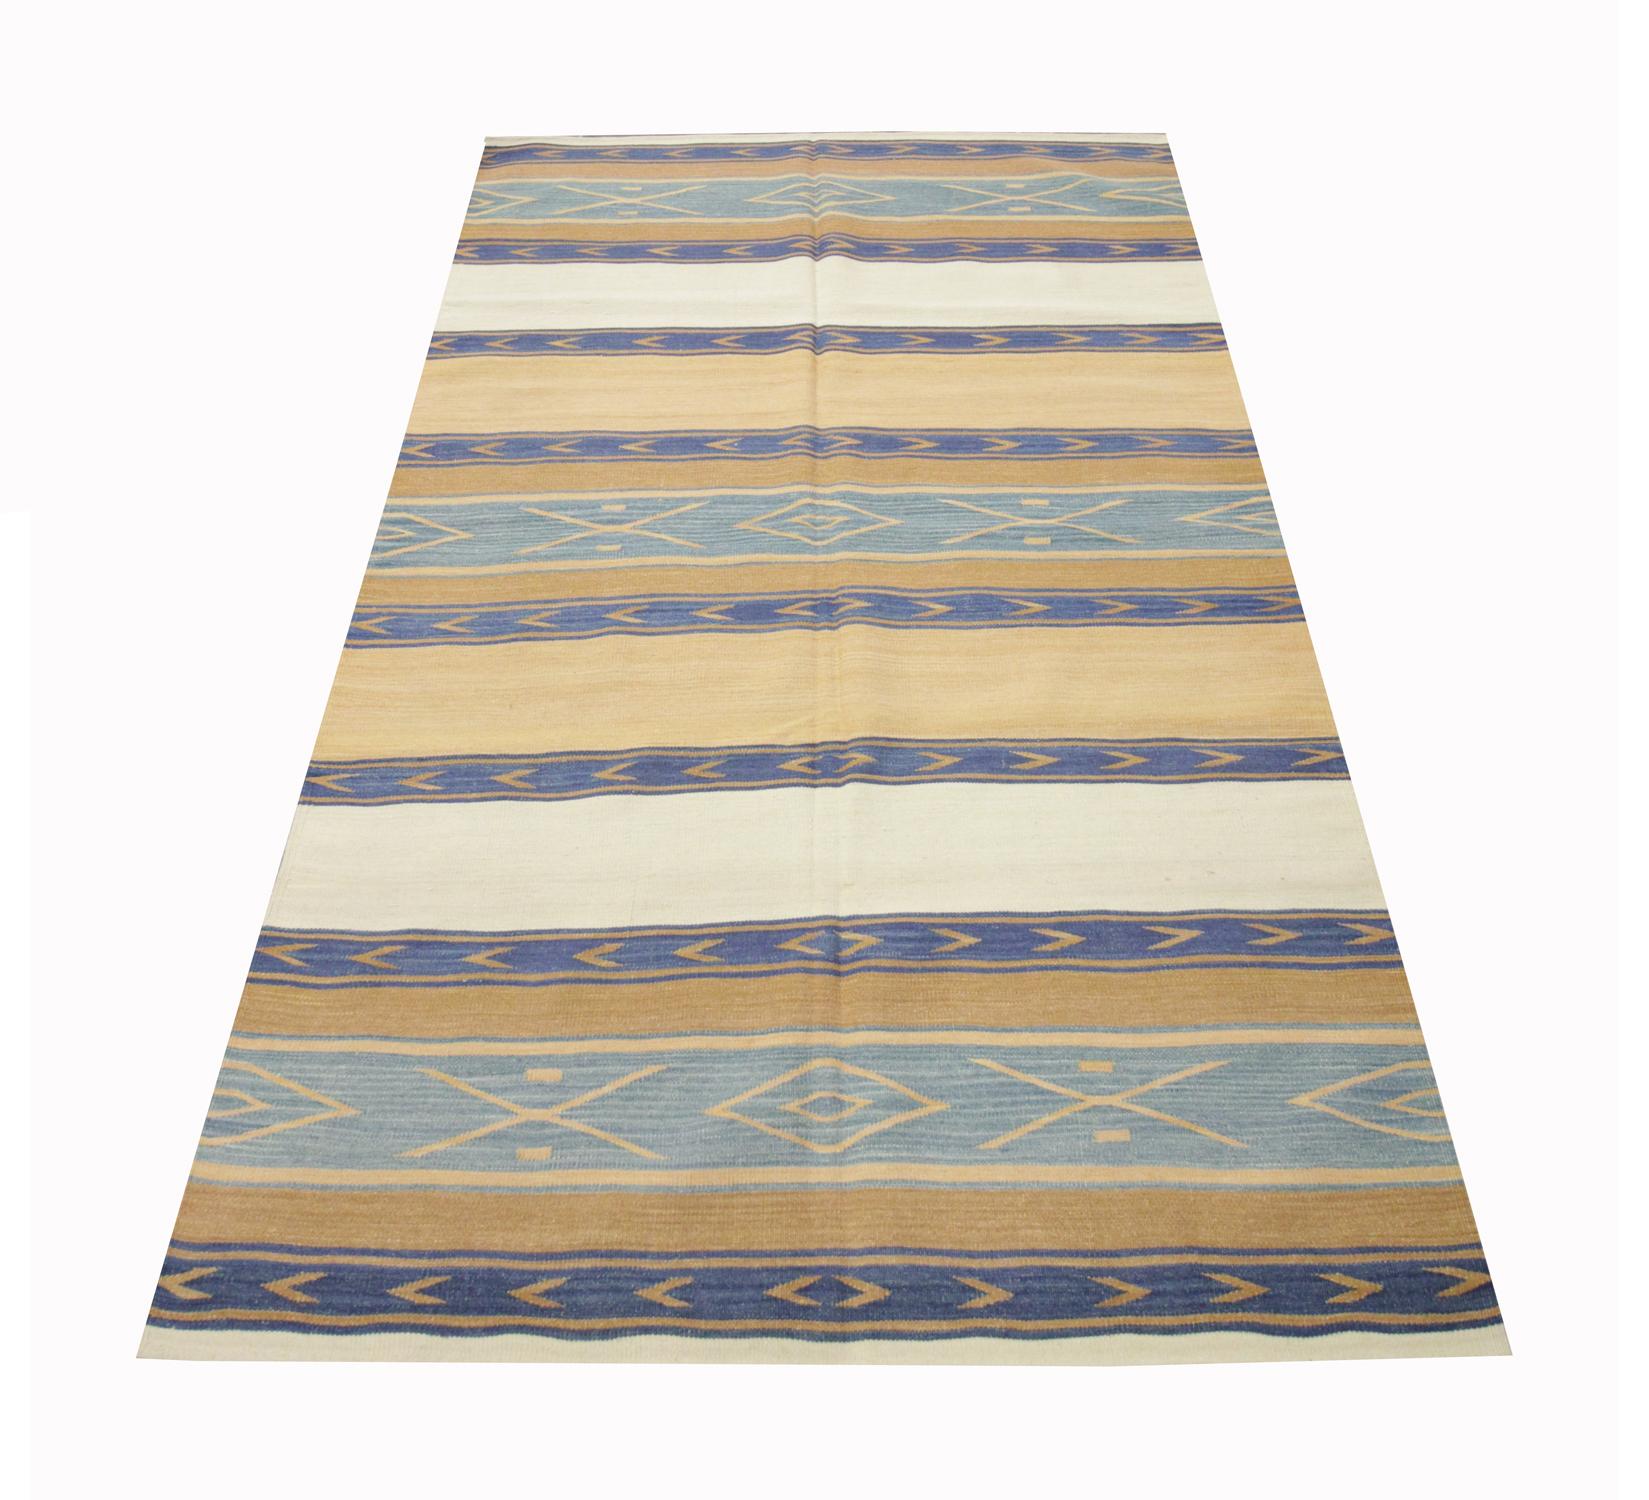 This simple stripe wool rug is a modern kilim woven with a simple colour palette including beige, cream and blue with Geometric patterns woven throughout the blue stripes. The colours and design in this wool kilim make it the perfect accent rug for